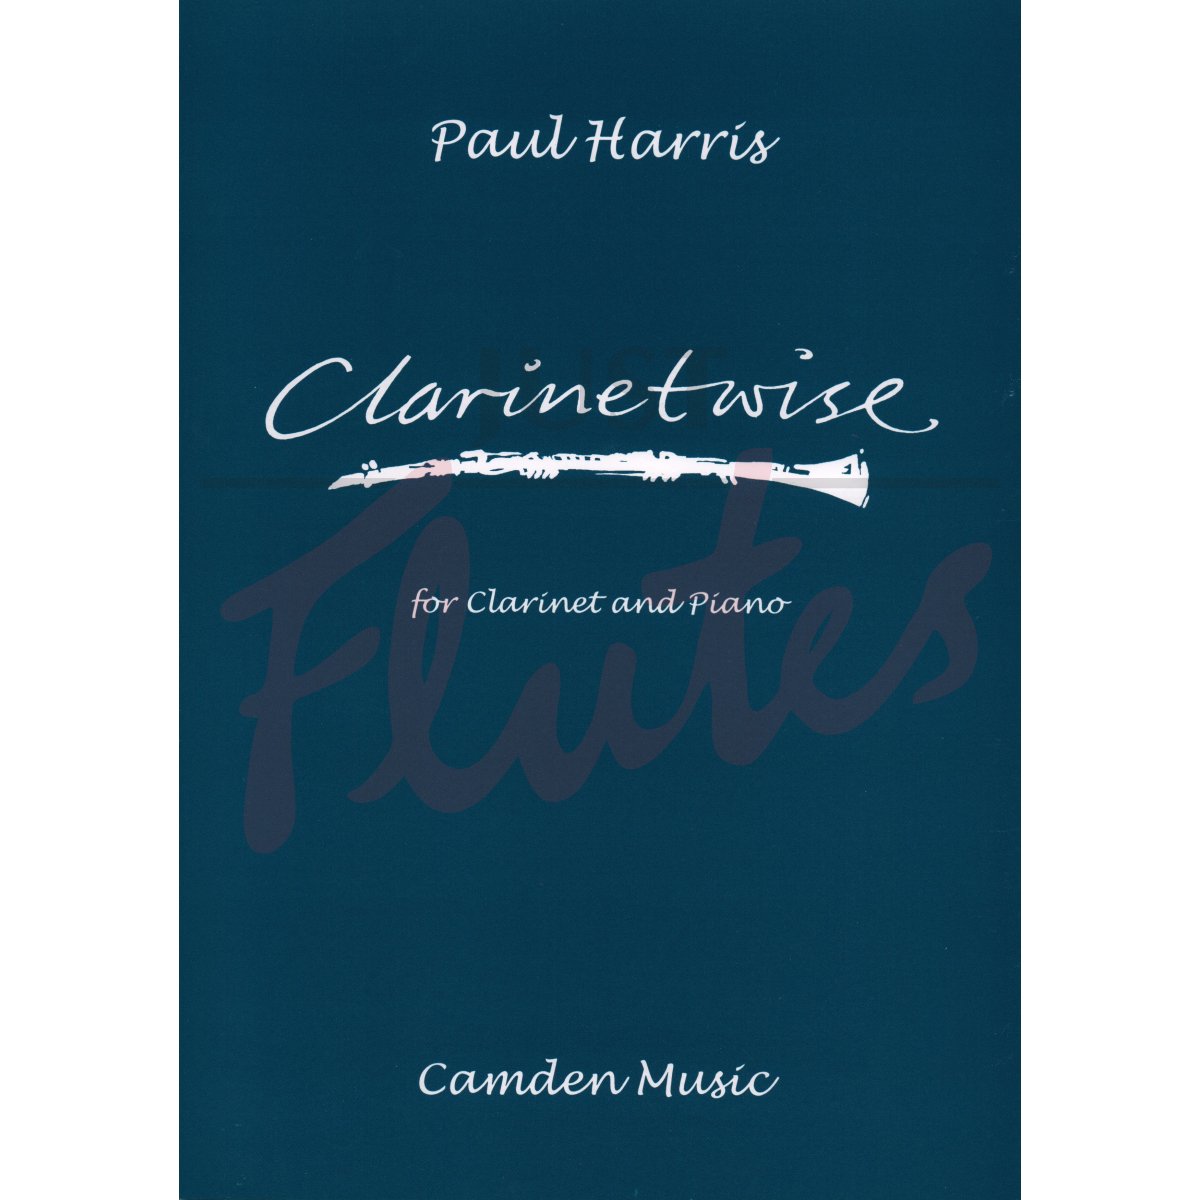 Clarinetwise for Clarinet and Piano